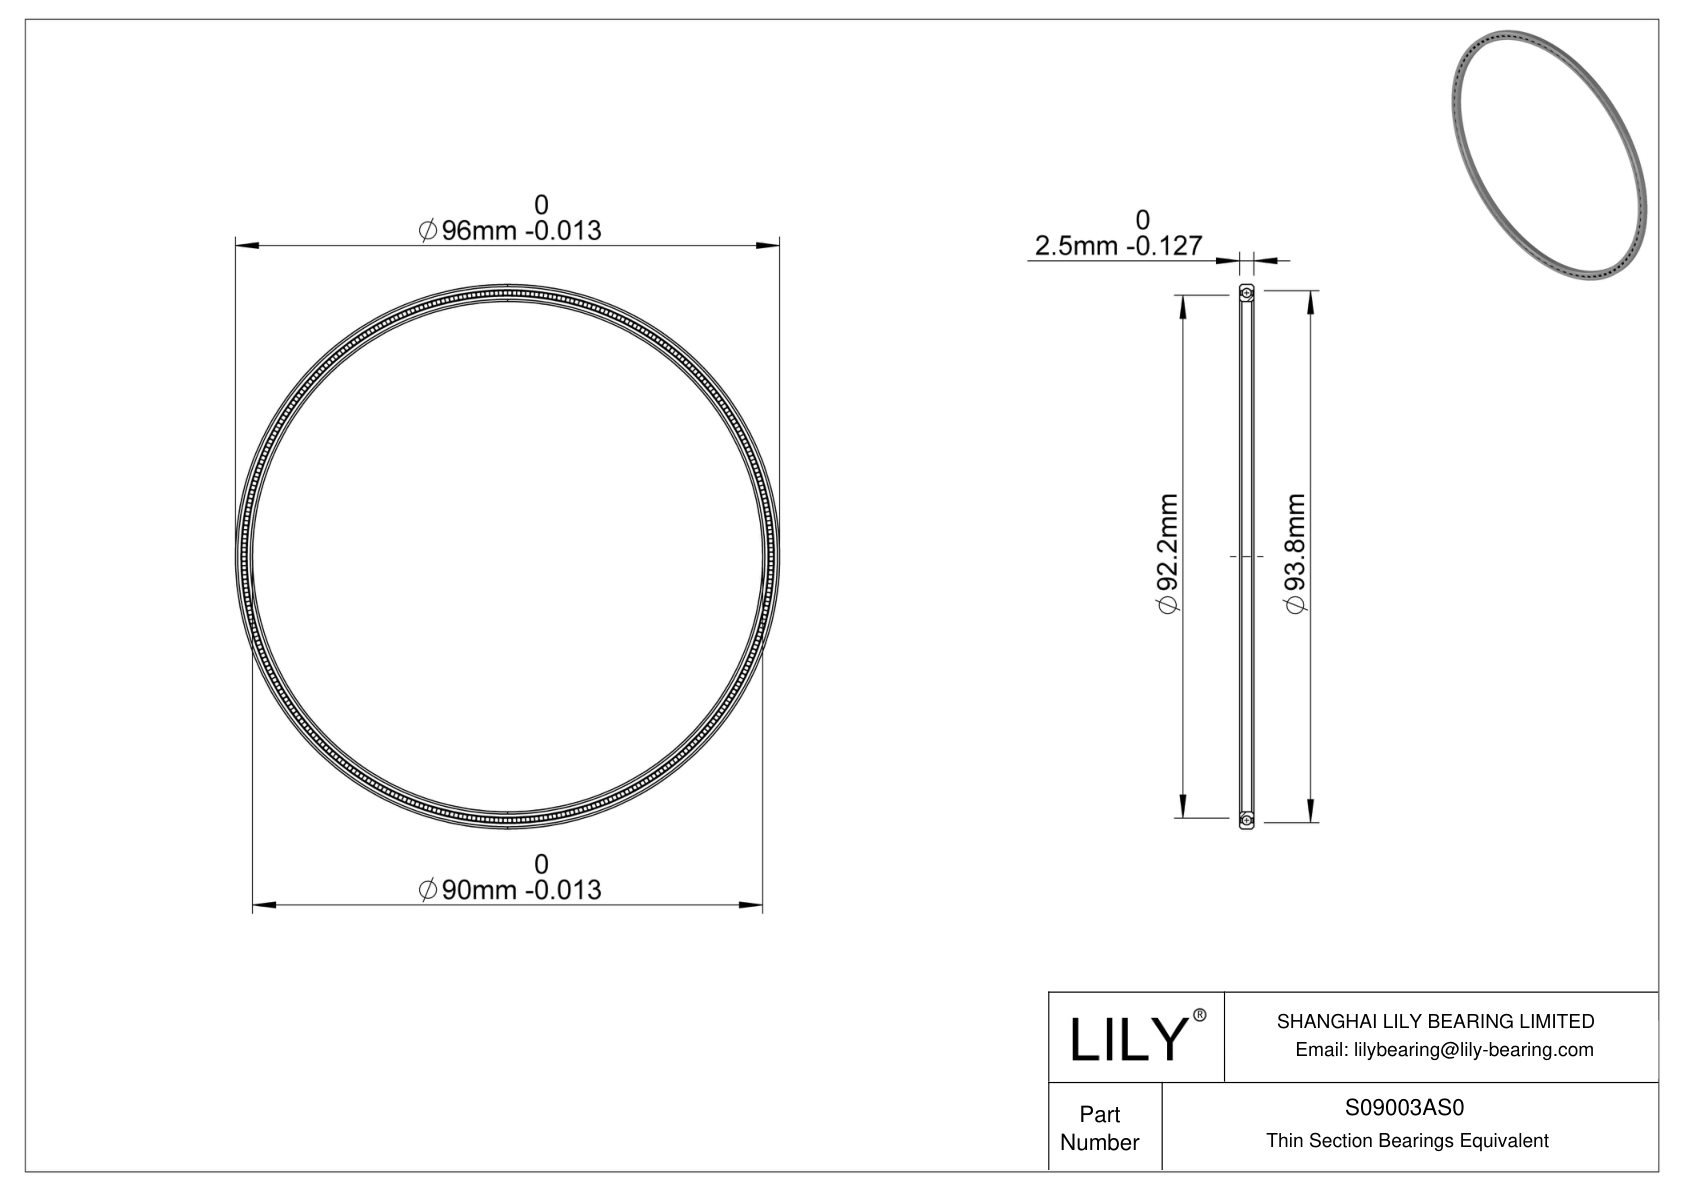 S09003AS0 Constant Section (CS) Bearings cad drawing